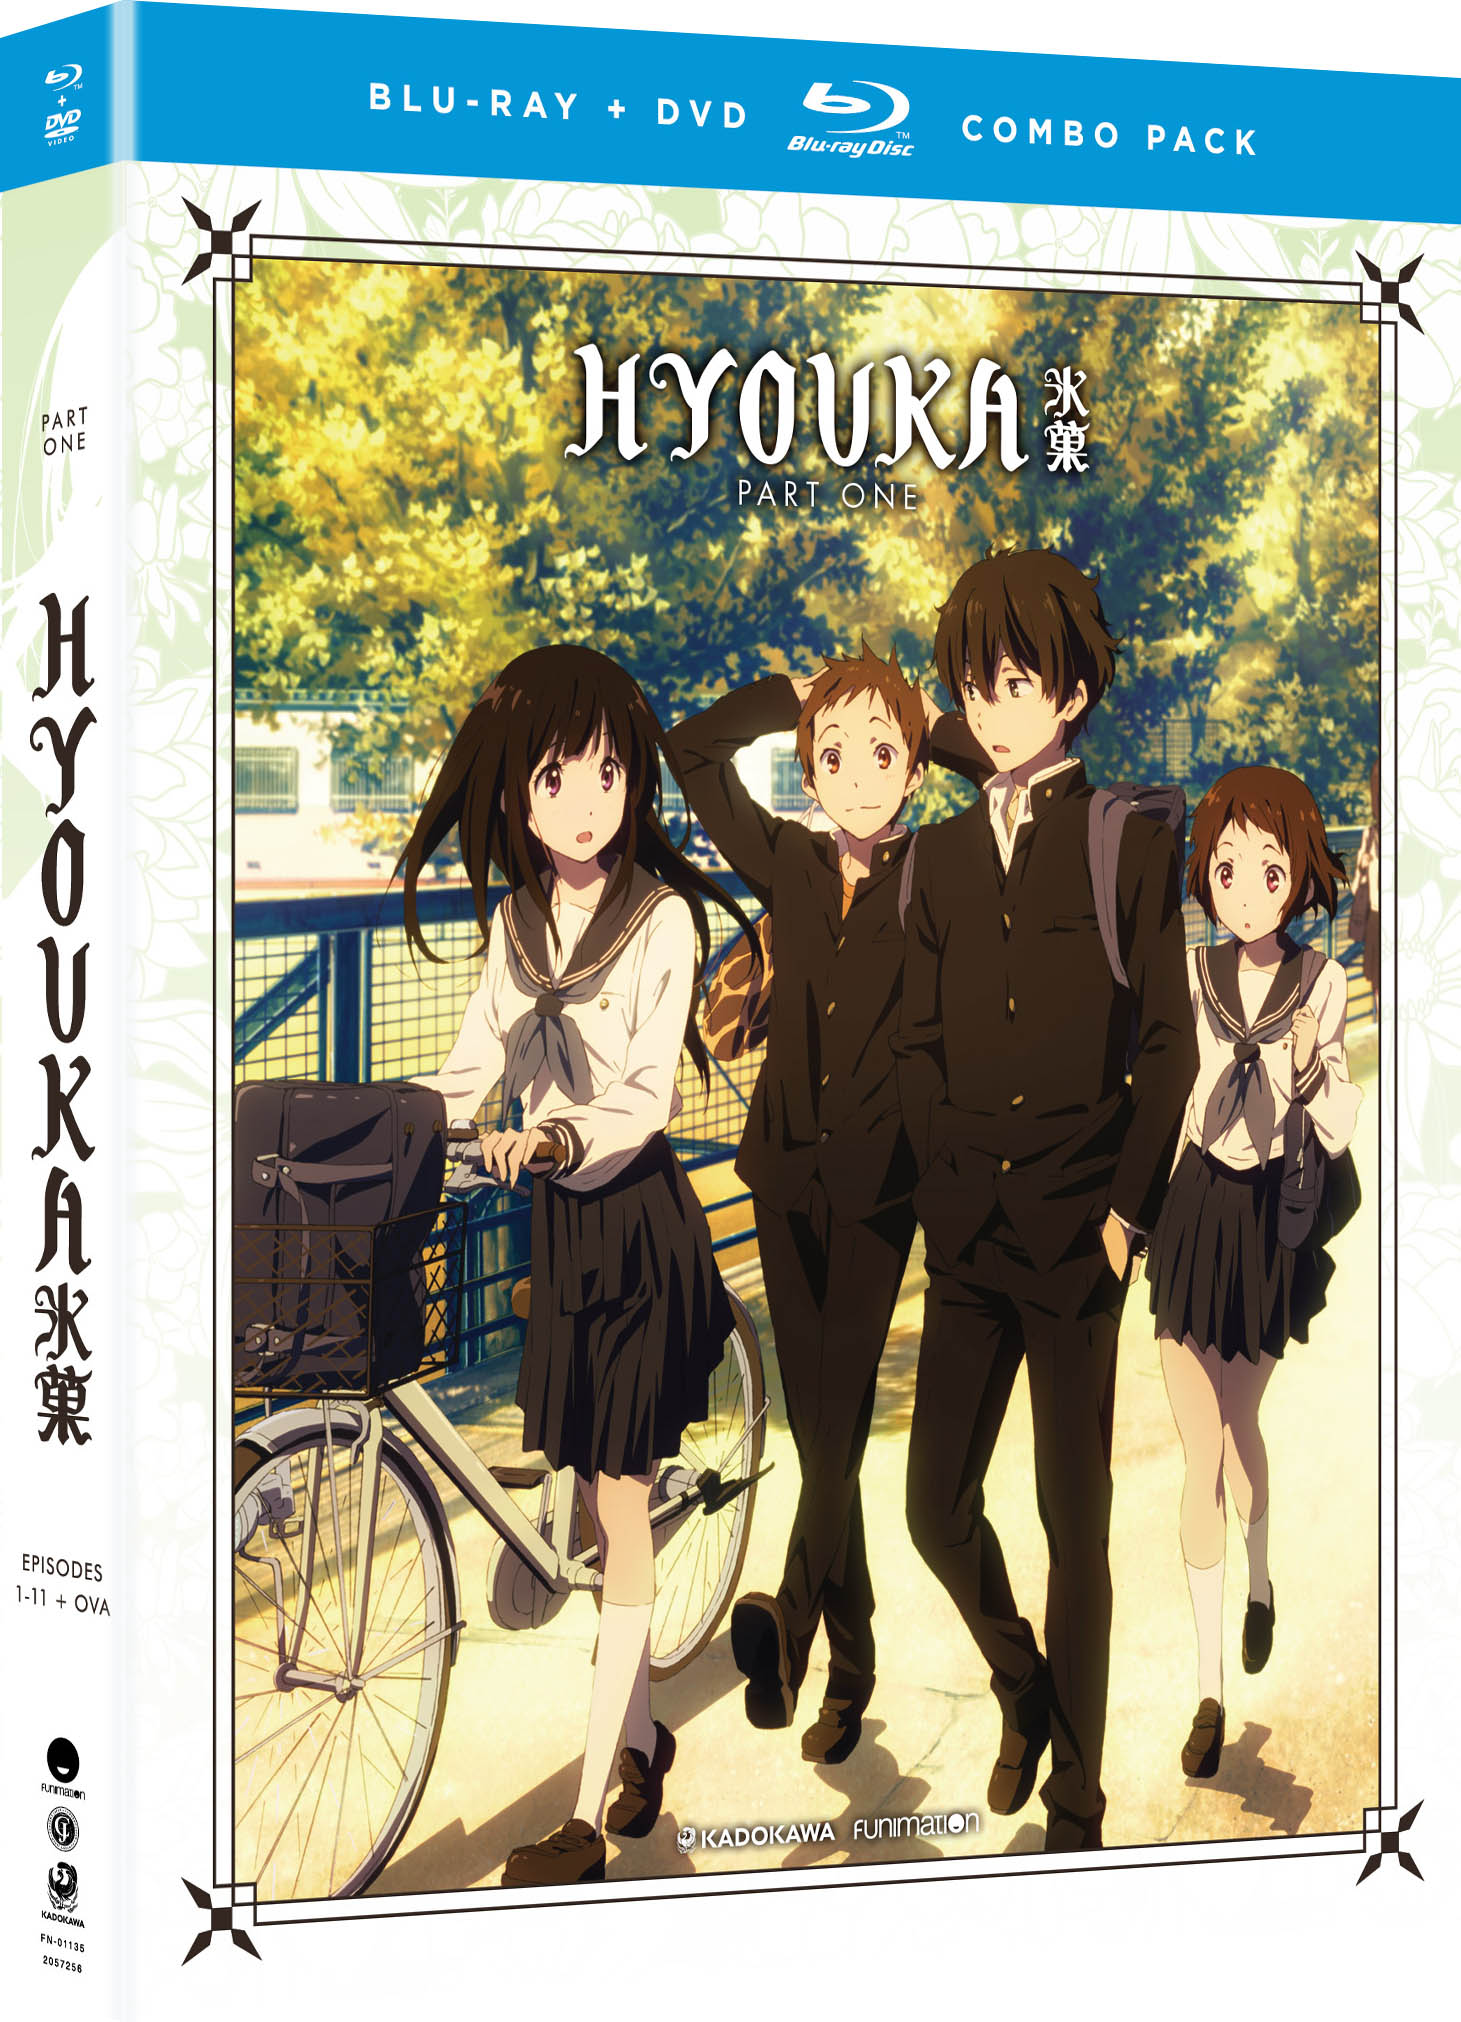 Hyouka - The Complete Series - Blu-ray + DVD image count 1